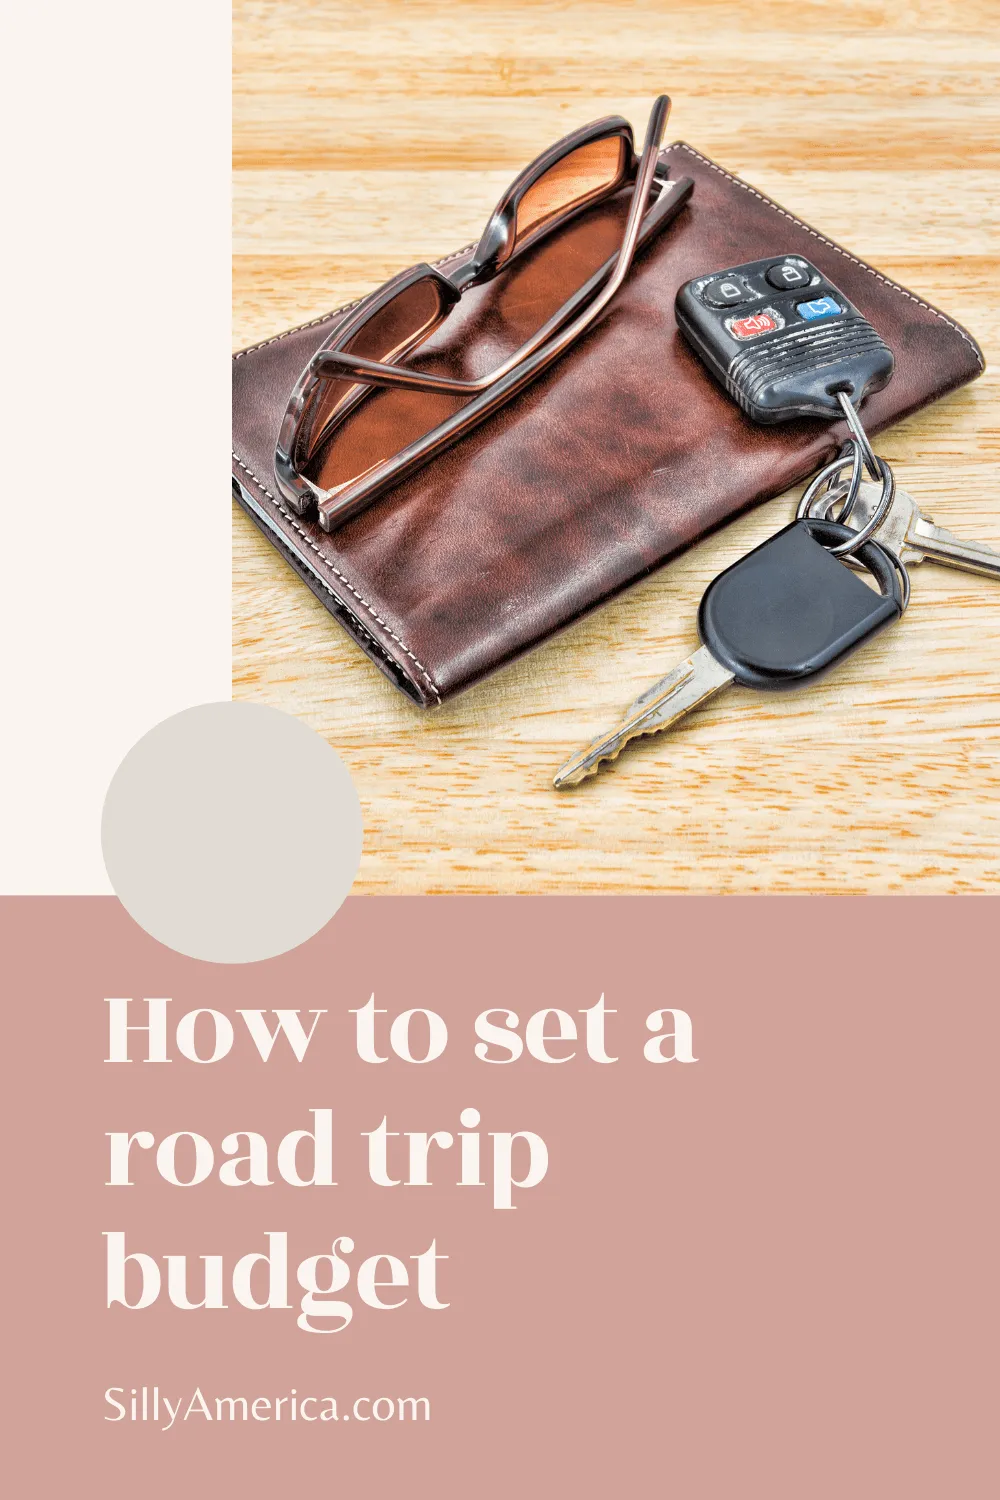 This essential road trip budget planner will help you get organized to save money and road trip wisely. Road trips don't have to cost a lot but by planning ahead you'll get the most bang for your buck. These tips will show you how to plan a road trip on a budget.  #RoadTrip #RoadTripPlanner #RoadTripBudget #RoadTripBudgetPlanner #RoadTripBudgetTips #RoadTripTips #RoadTripPlanning